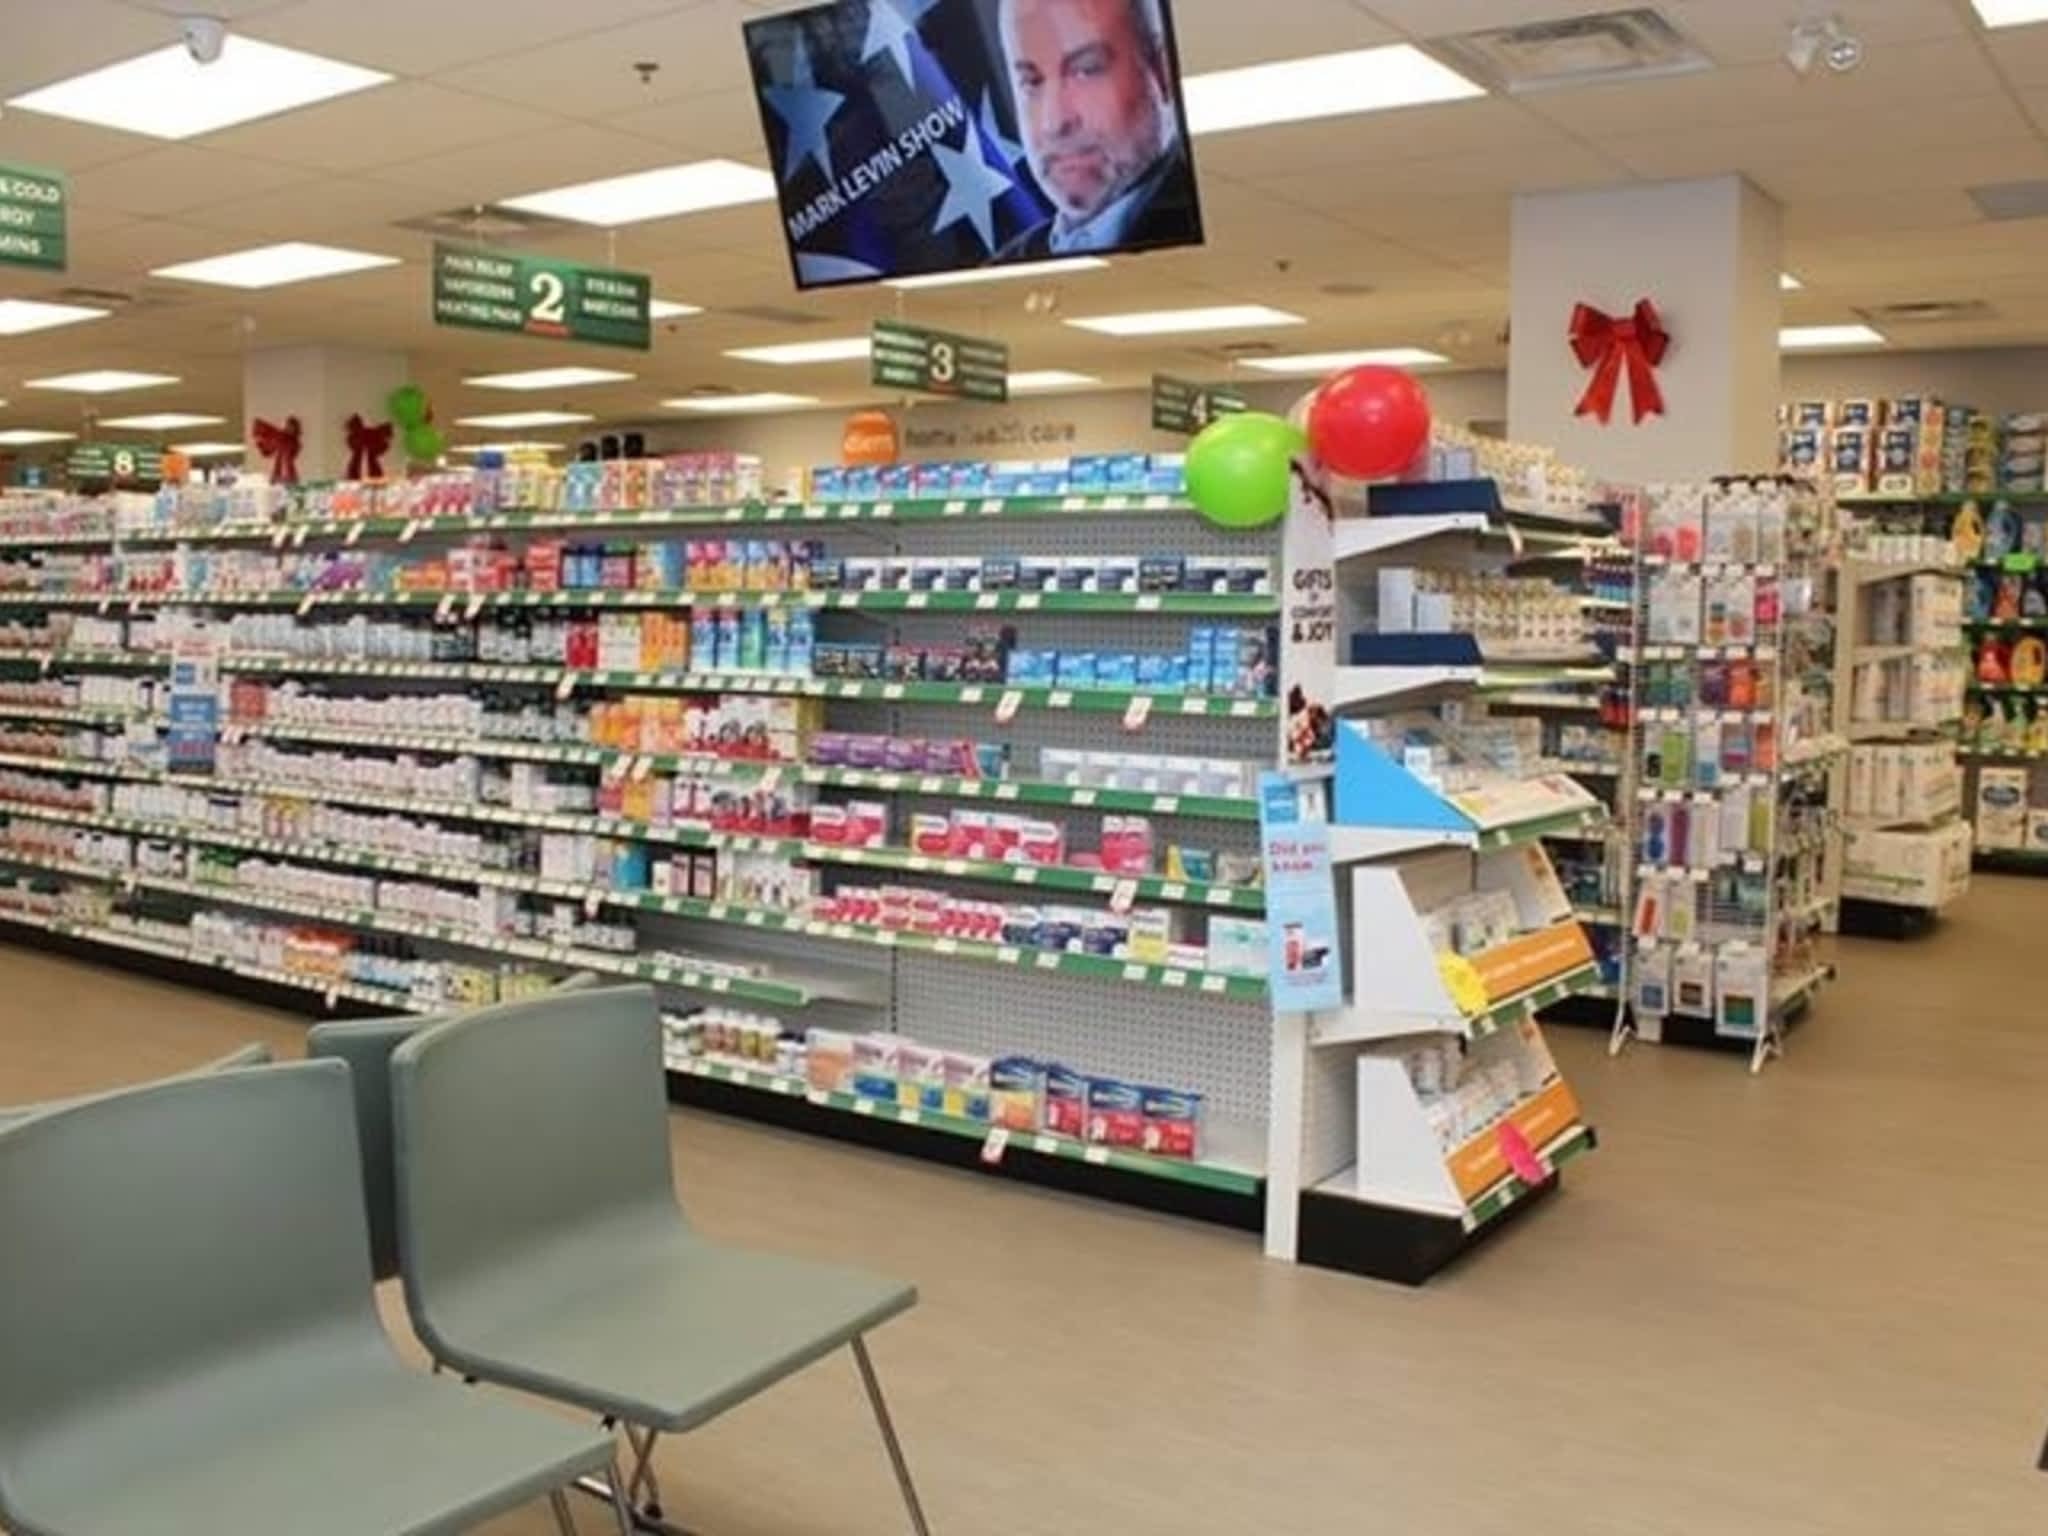 photo Guardian - Primary Care Pharmacy